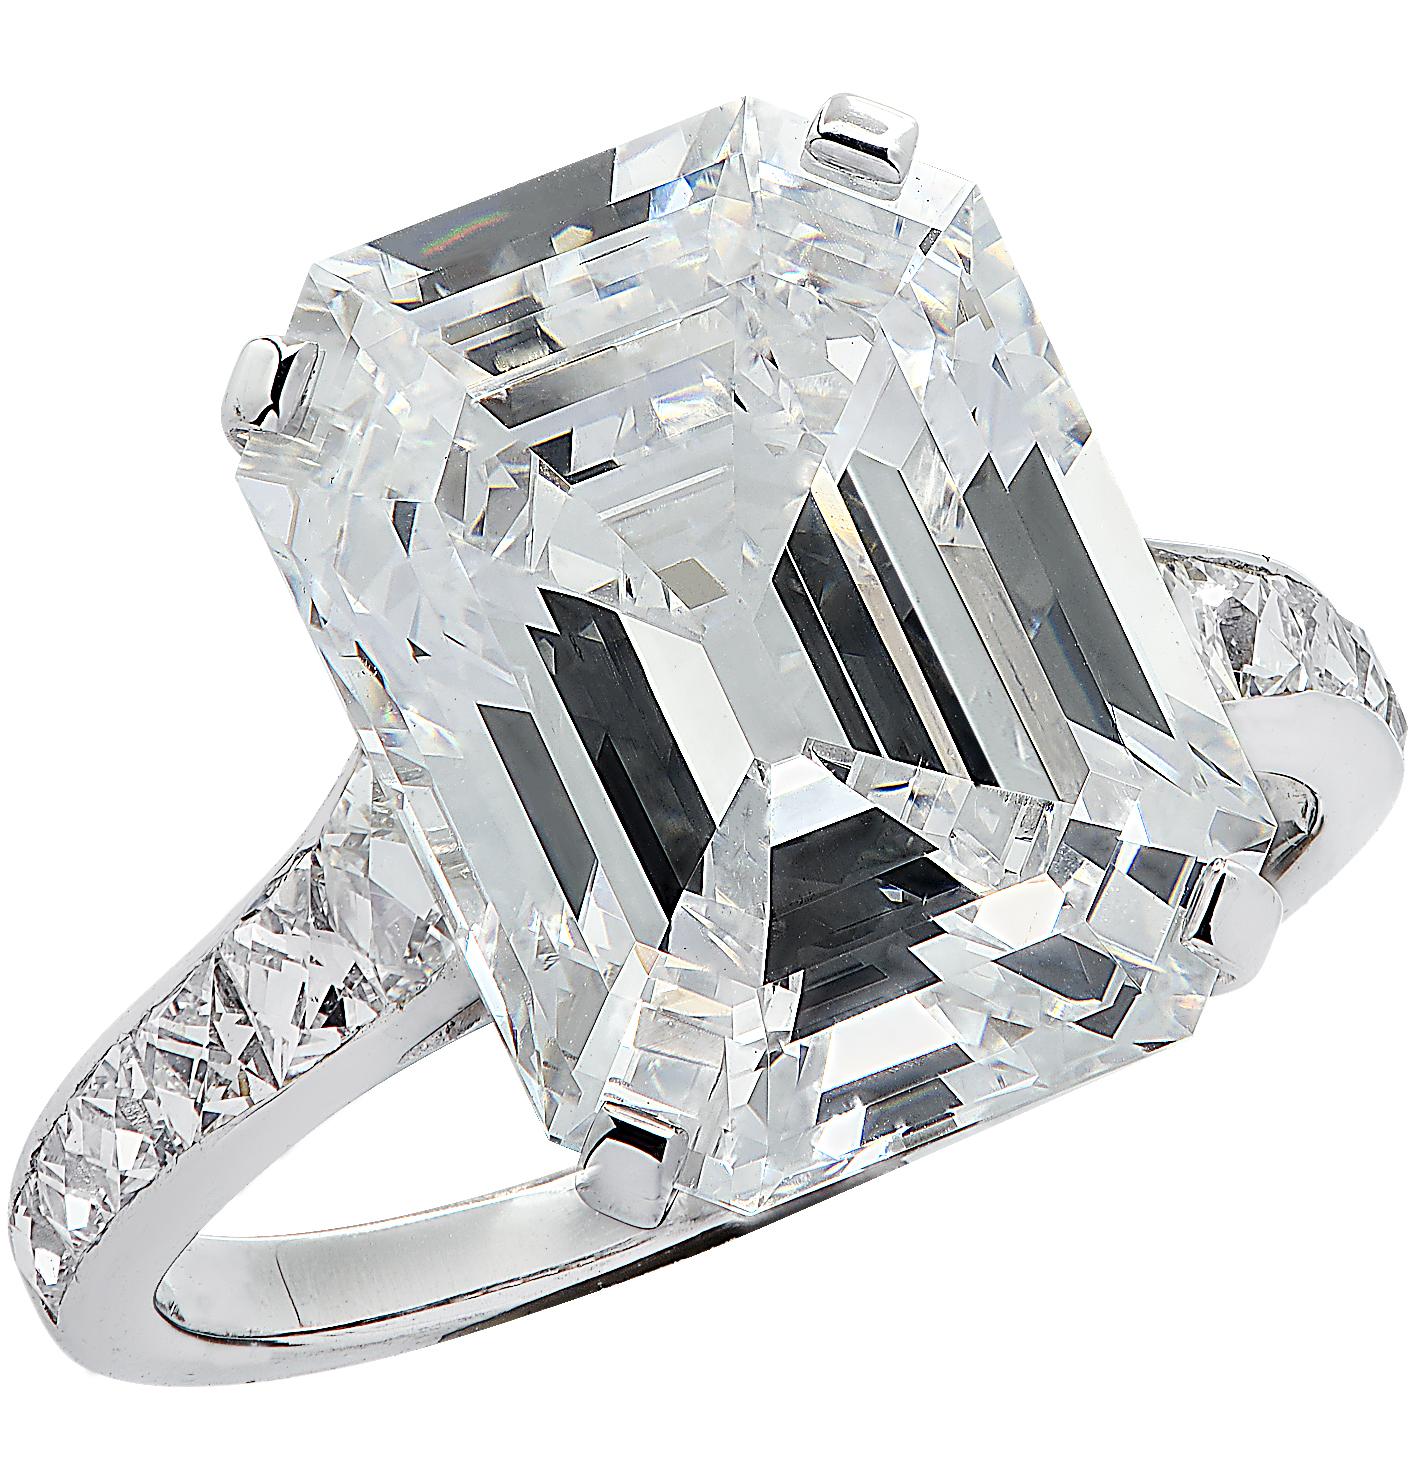 Vivid Diamonds GIA Certified 7.23 Carat Emerald Cut Diamond Engagement Ring In New Condition For Sale In Miami, FL